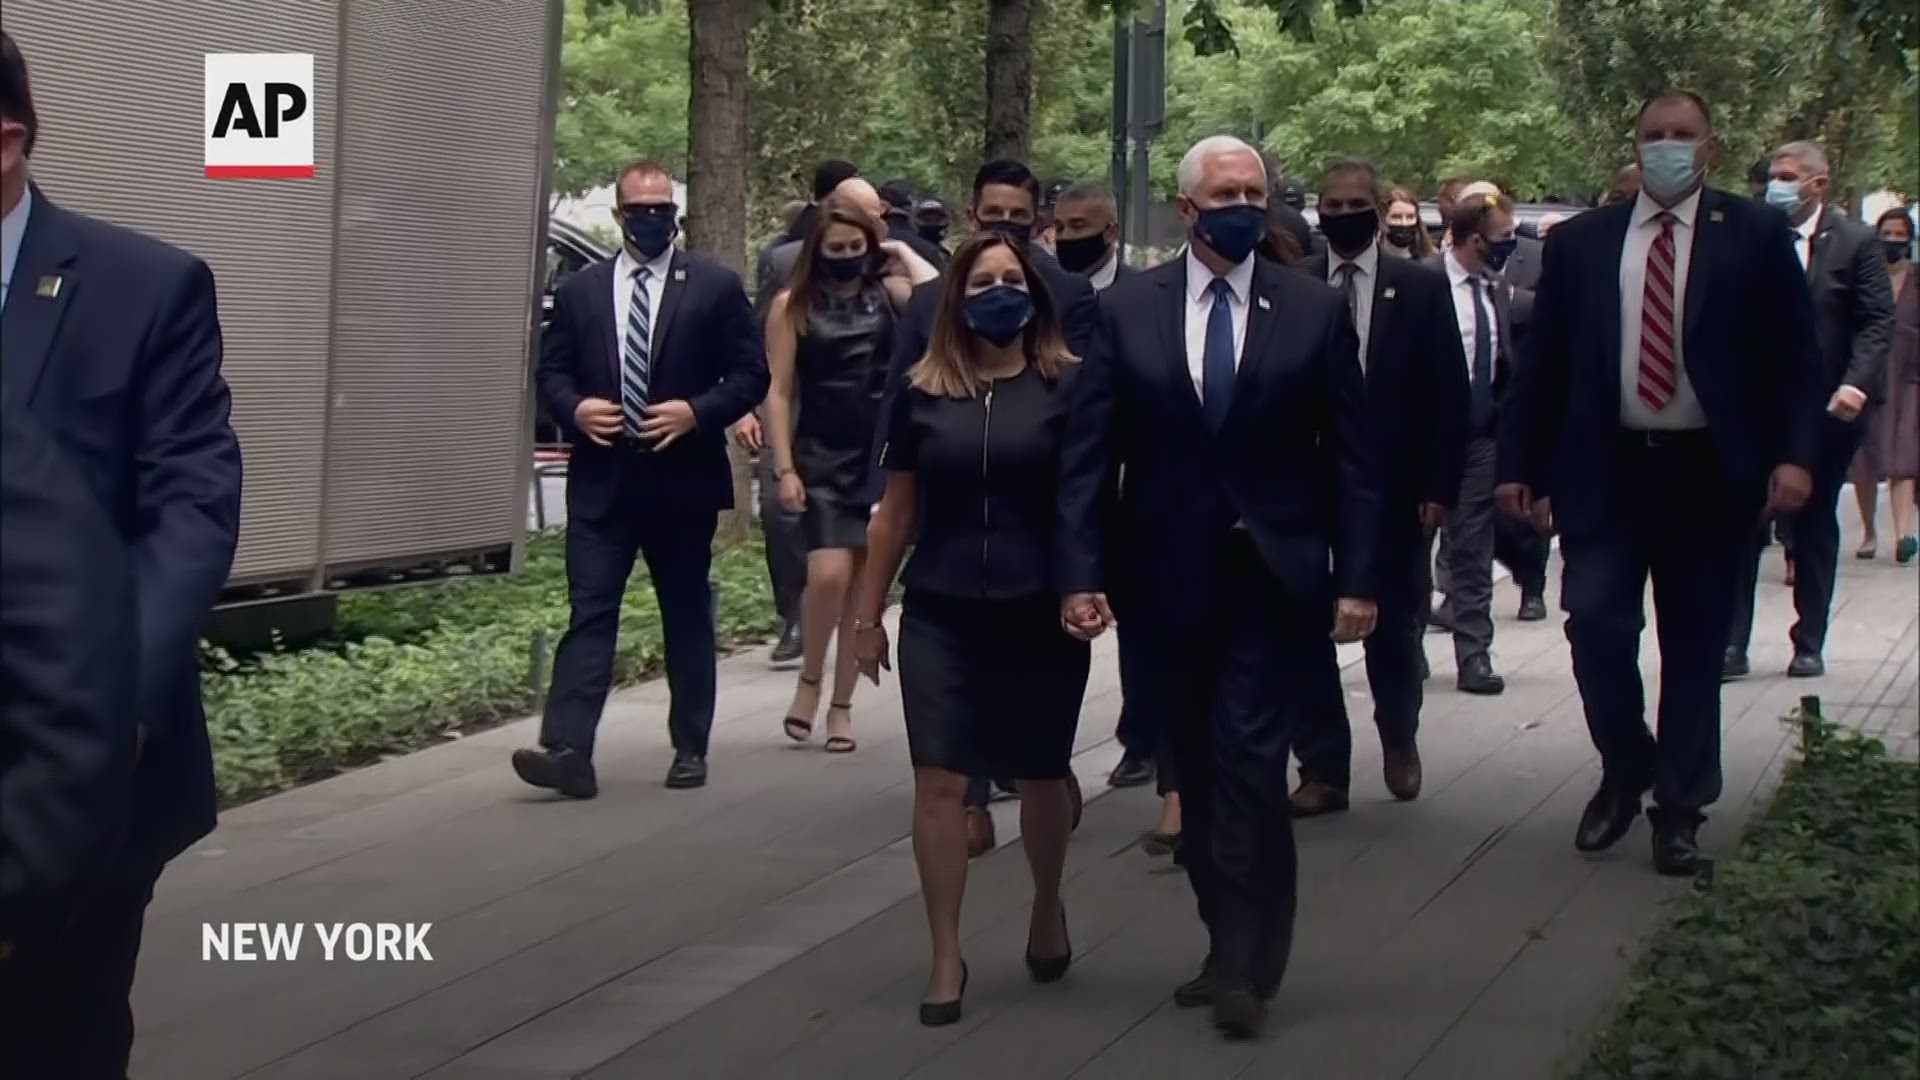 Vice President Mike Pence and Democratic presidential candidate Joe Biden arrived at the 9/11 memorial in New York on Friday.